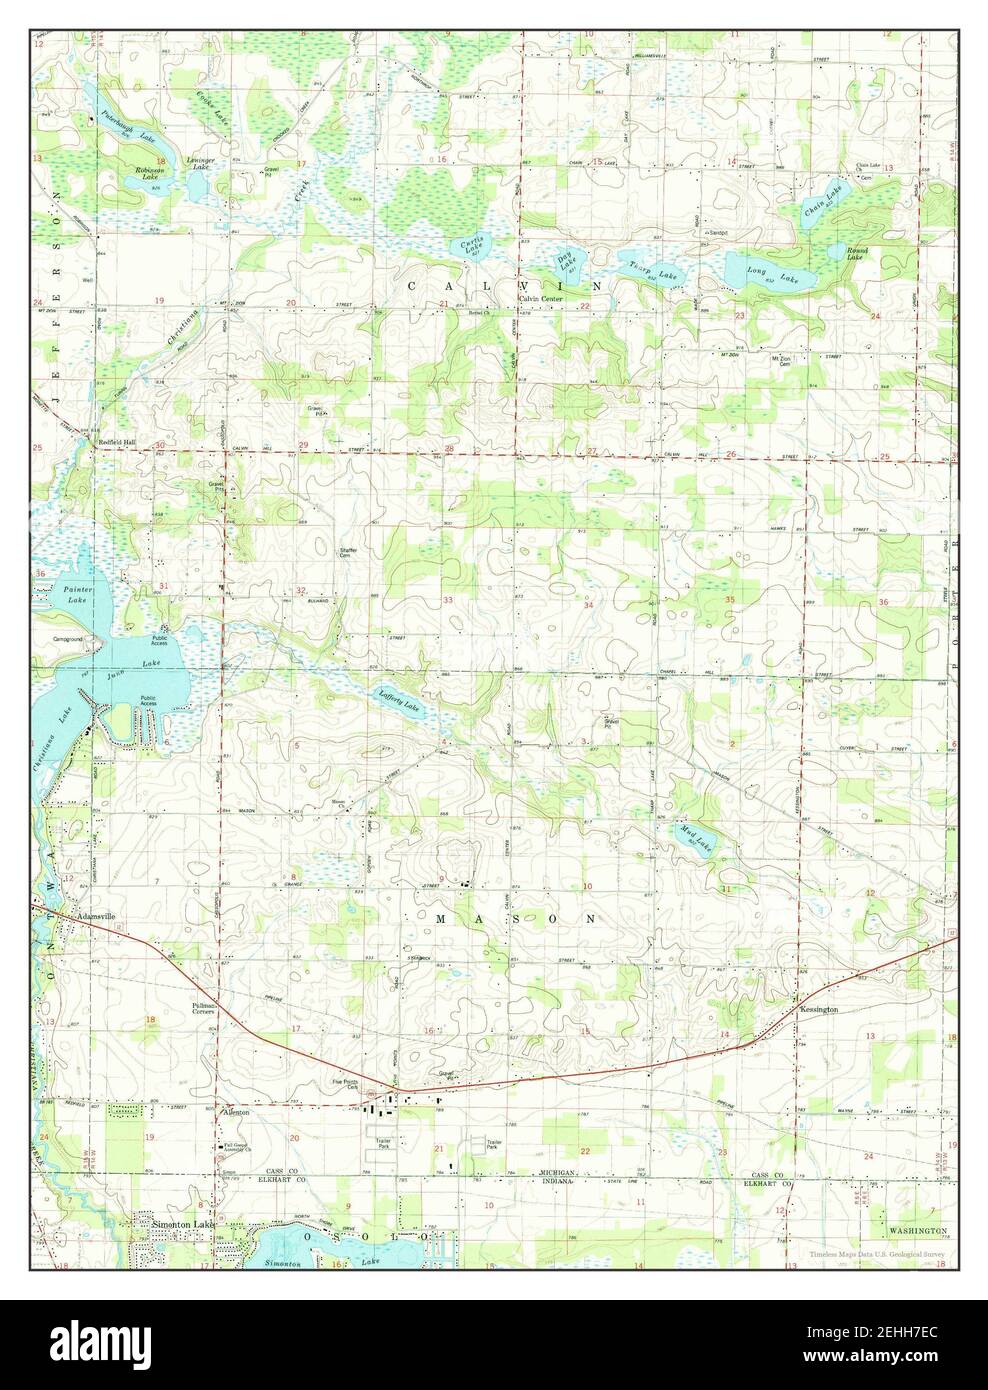 Adamsville, Michigan, map 1981, 1:24000, United States of America by Timeless Maps, data U.S. Geological Survey Stock Photo